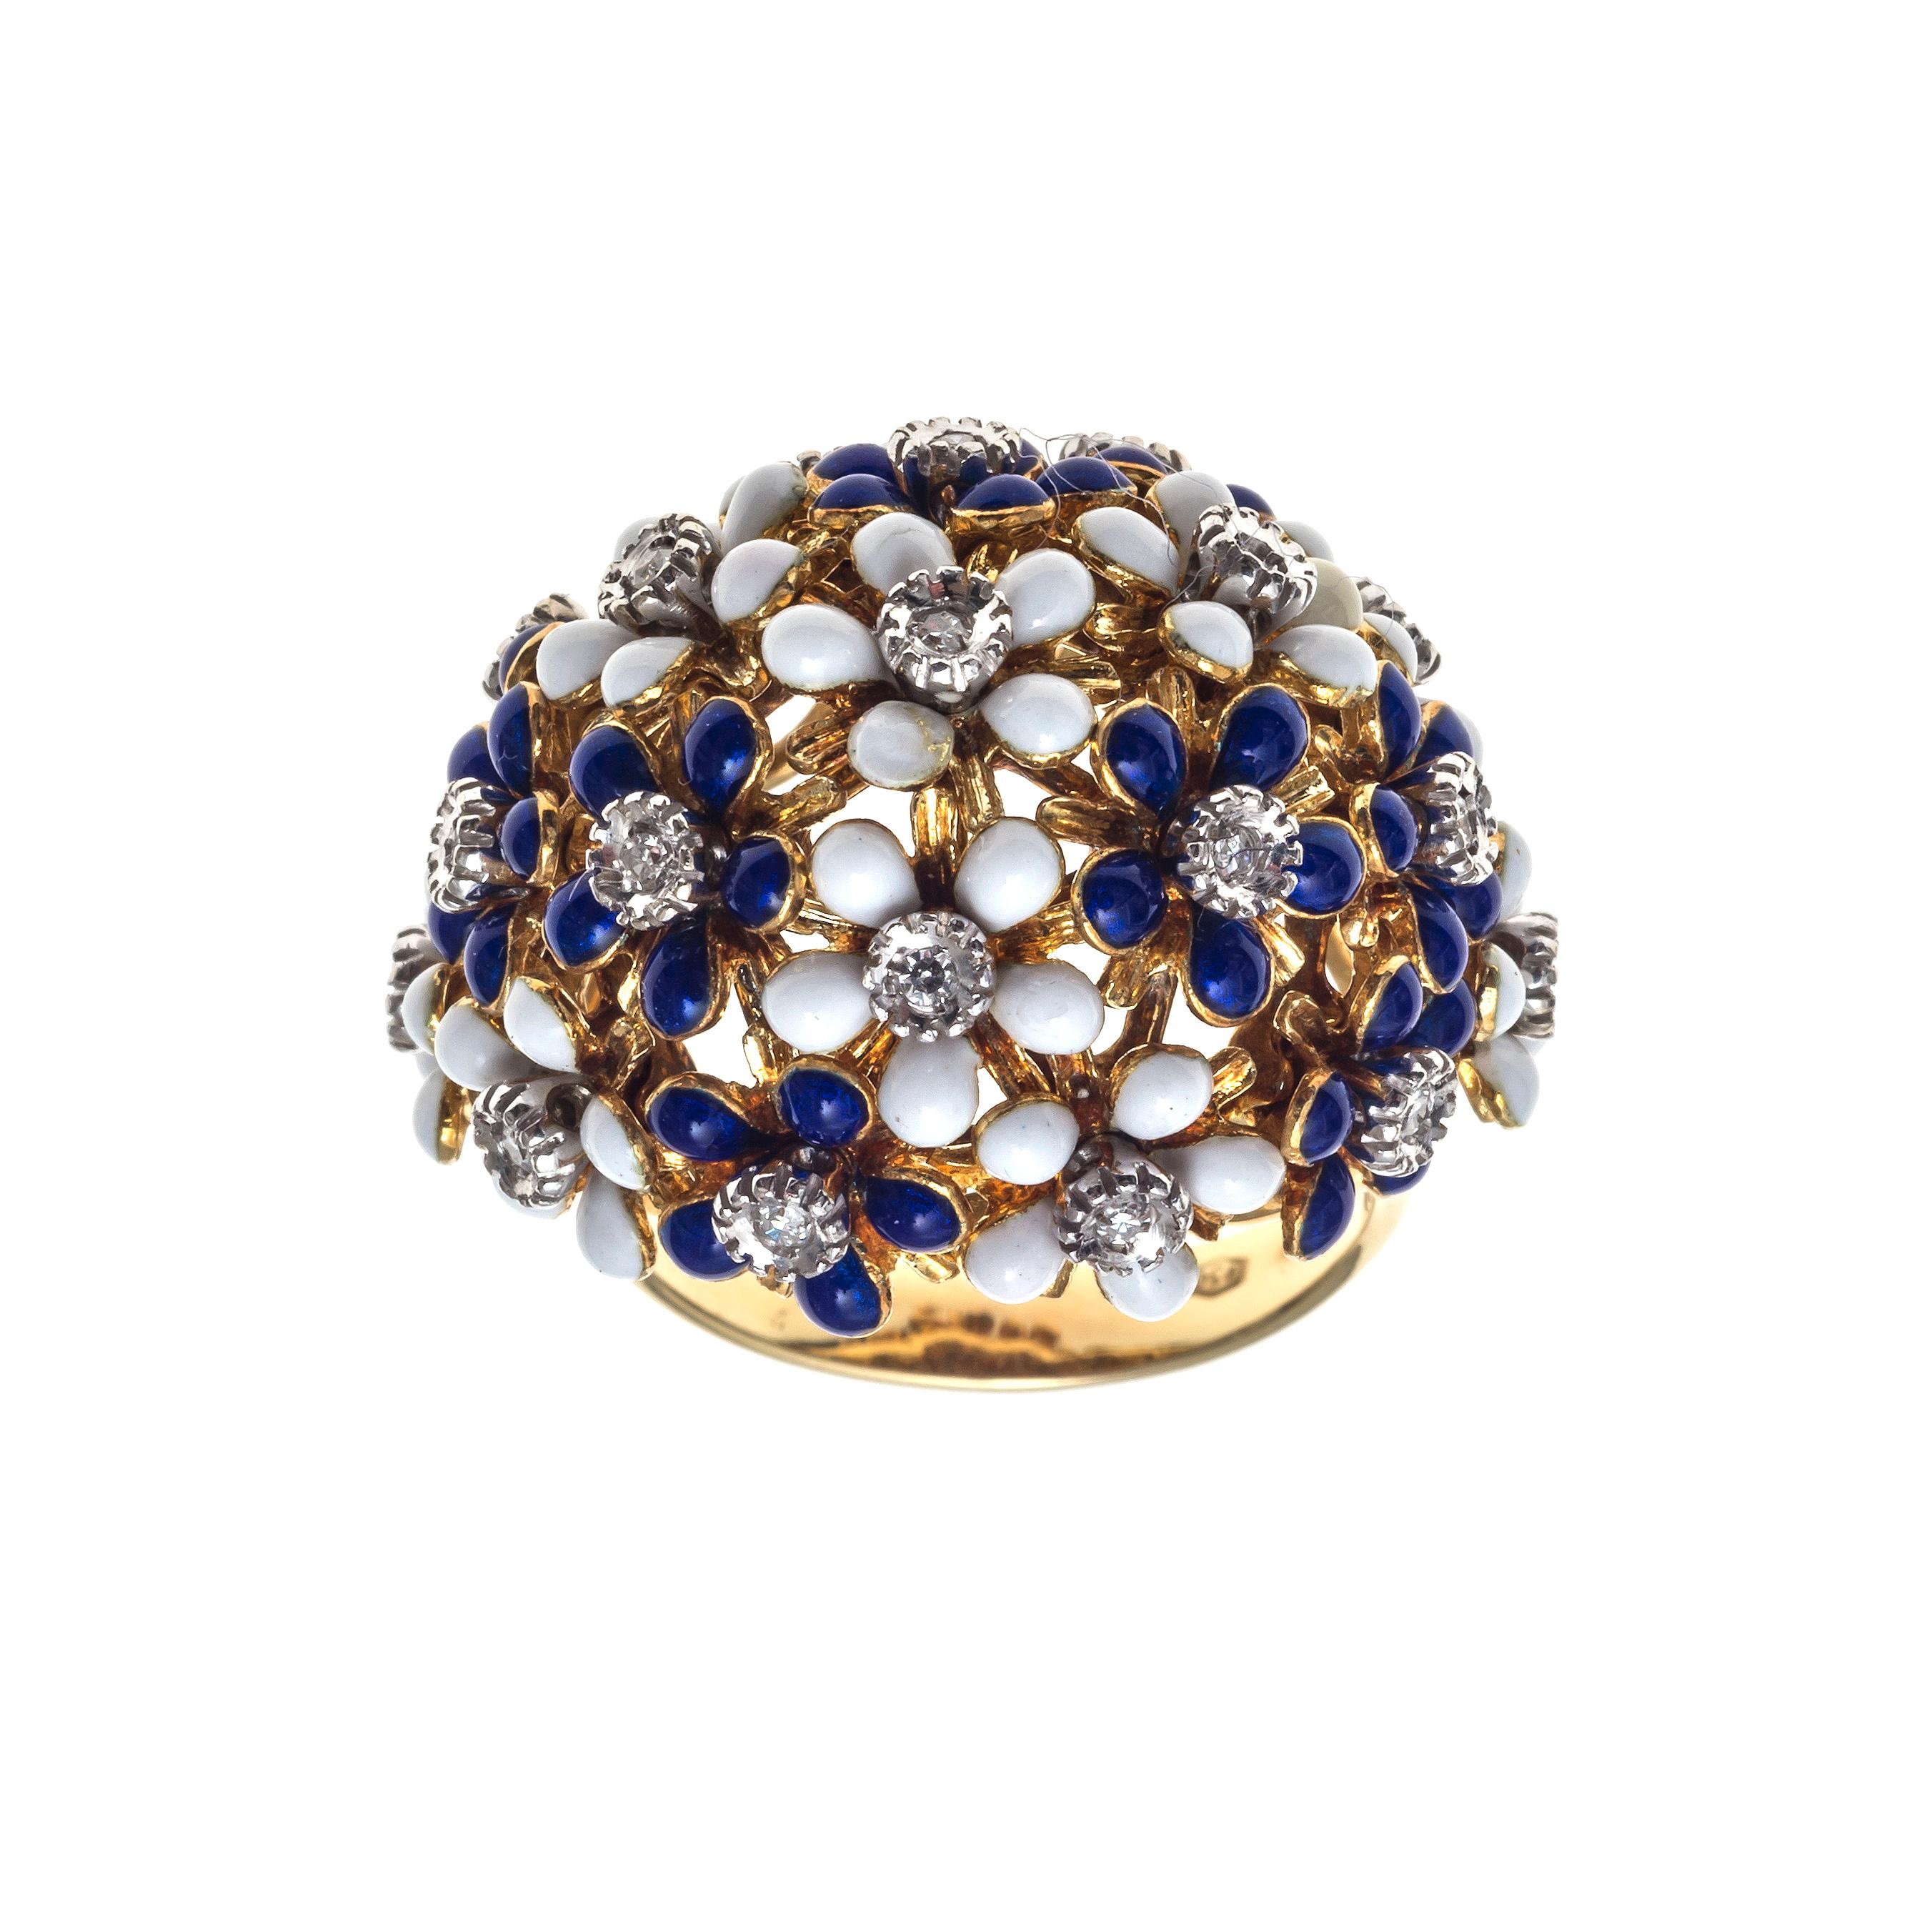 Blue and white enamelled floral domed cocktail ring made out of 18K yellow gold. Ten white enamelled flowers alternate with nine navy blue enamelled flowers. Each flower has a white gold center set with a small diamond. Each enamelled flower petal